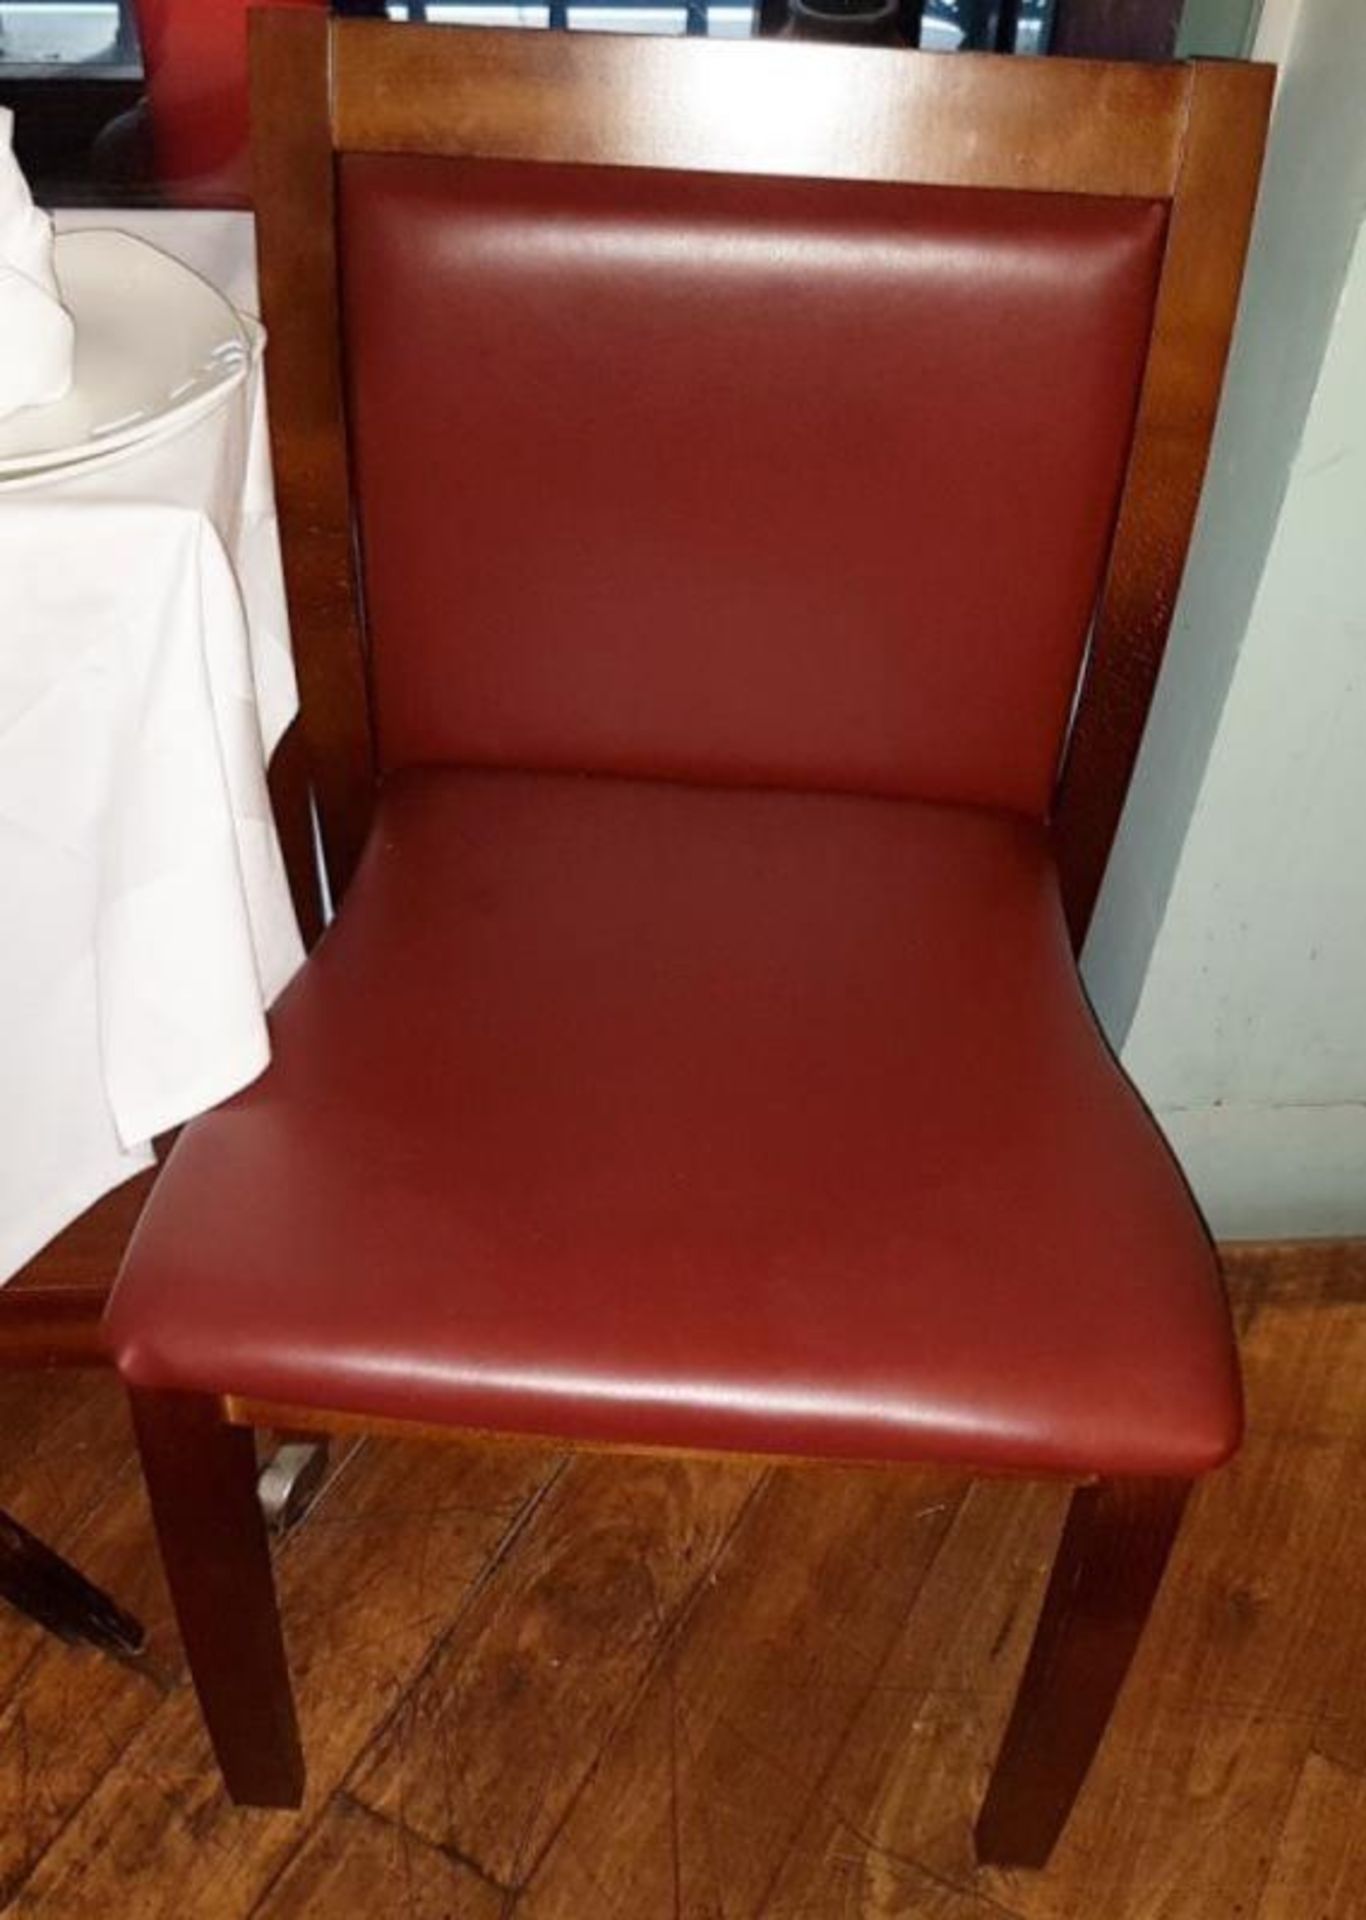 12 x Burgundy Faux Leather Dining Chairs With Wide Cushioned Seats - CL297 - Various Conditions - Re - Image 5 of 5